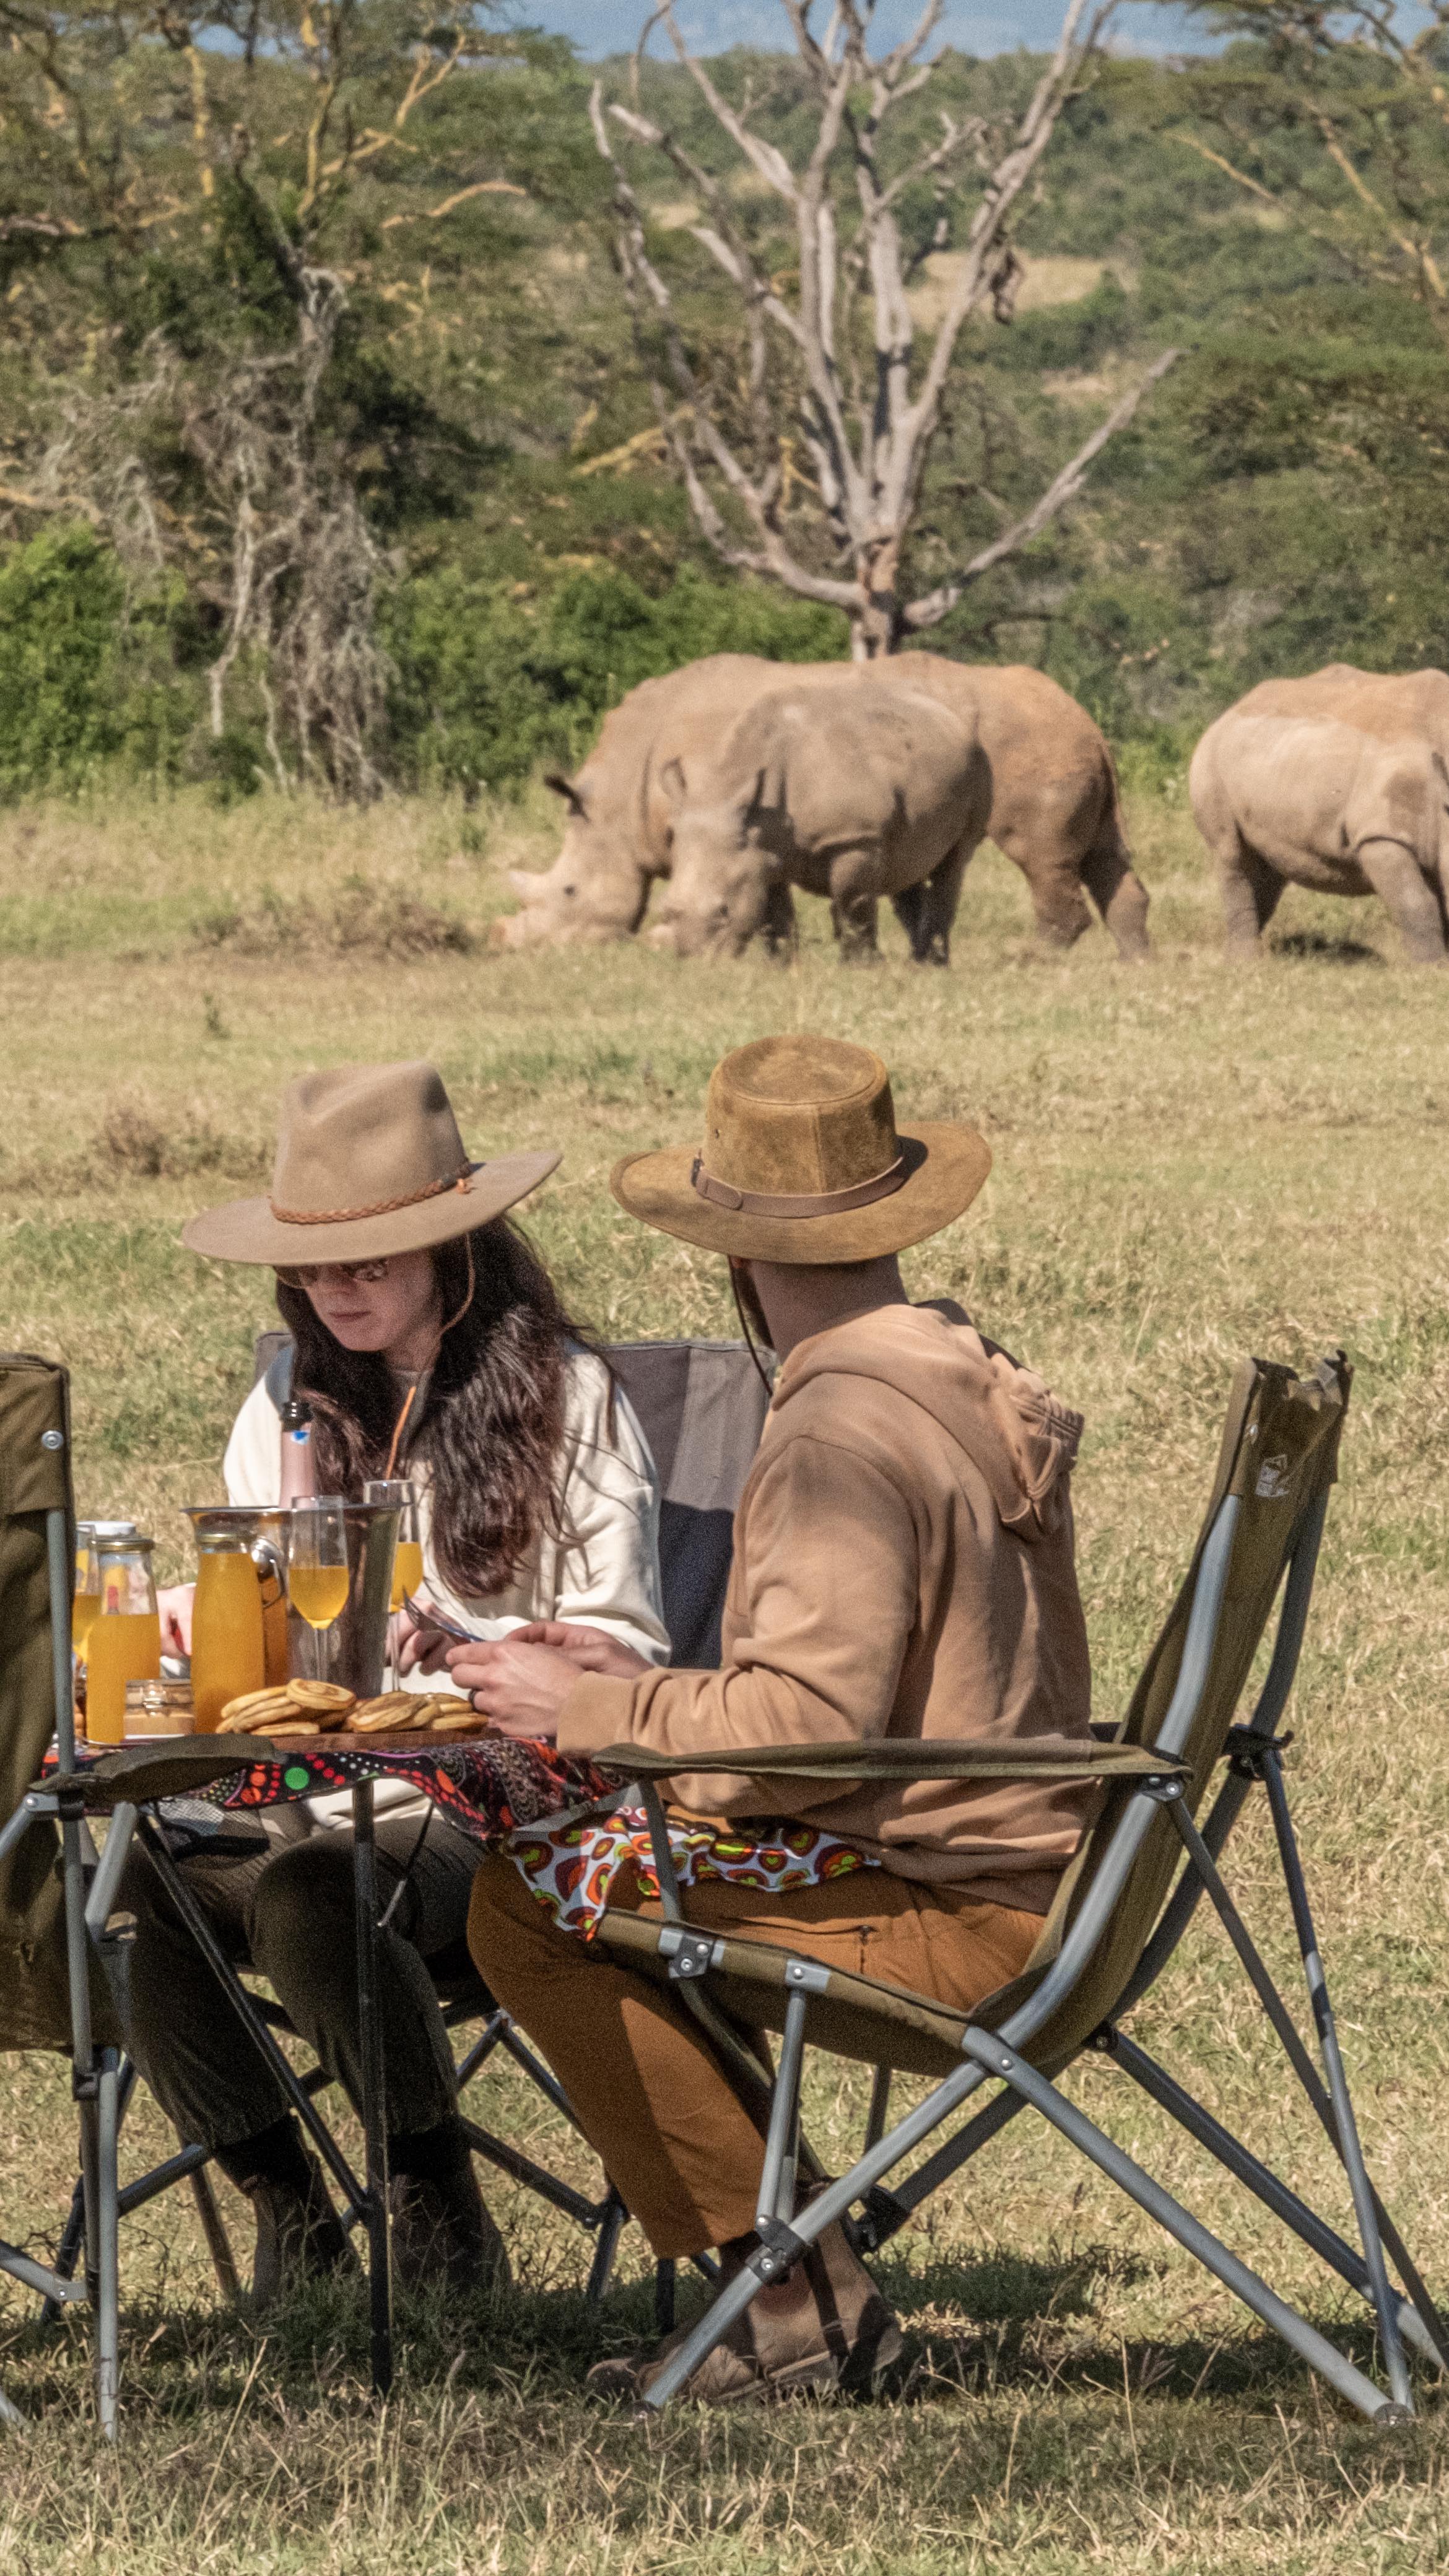 Sundays are for savouring a cookout breakfast at Solio Lodge, fueling up for an exciting game drive 🍳🌅

There’s no better way to start the day than with delicious food and the promise of adventure. 

#DiscoverTheSafariCollection #WelcomeToKenya #TheSafariCollection #SolioLodge #Conservation #Rhino #BlackRhino #WhiteRhino #RhinoConservation #Sundowner #MountKenya #OnSafari #GameDrive #CookOutBreakfast #SafariBreakfast